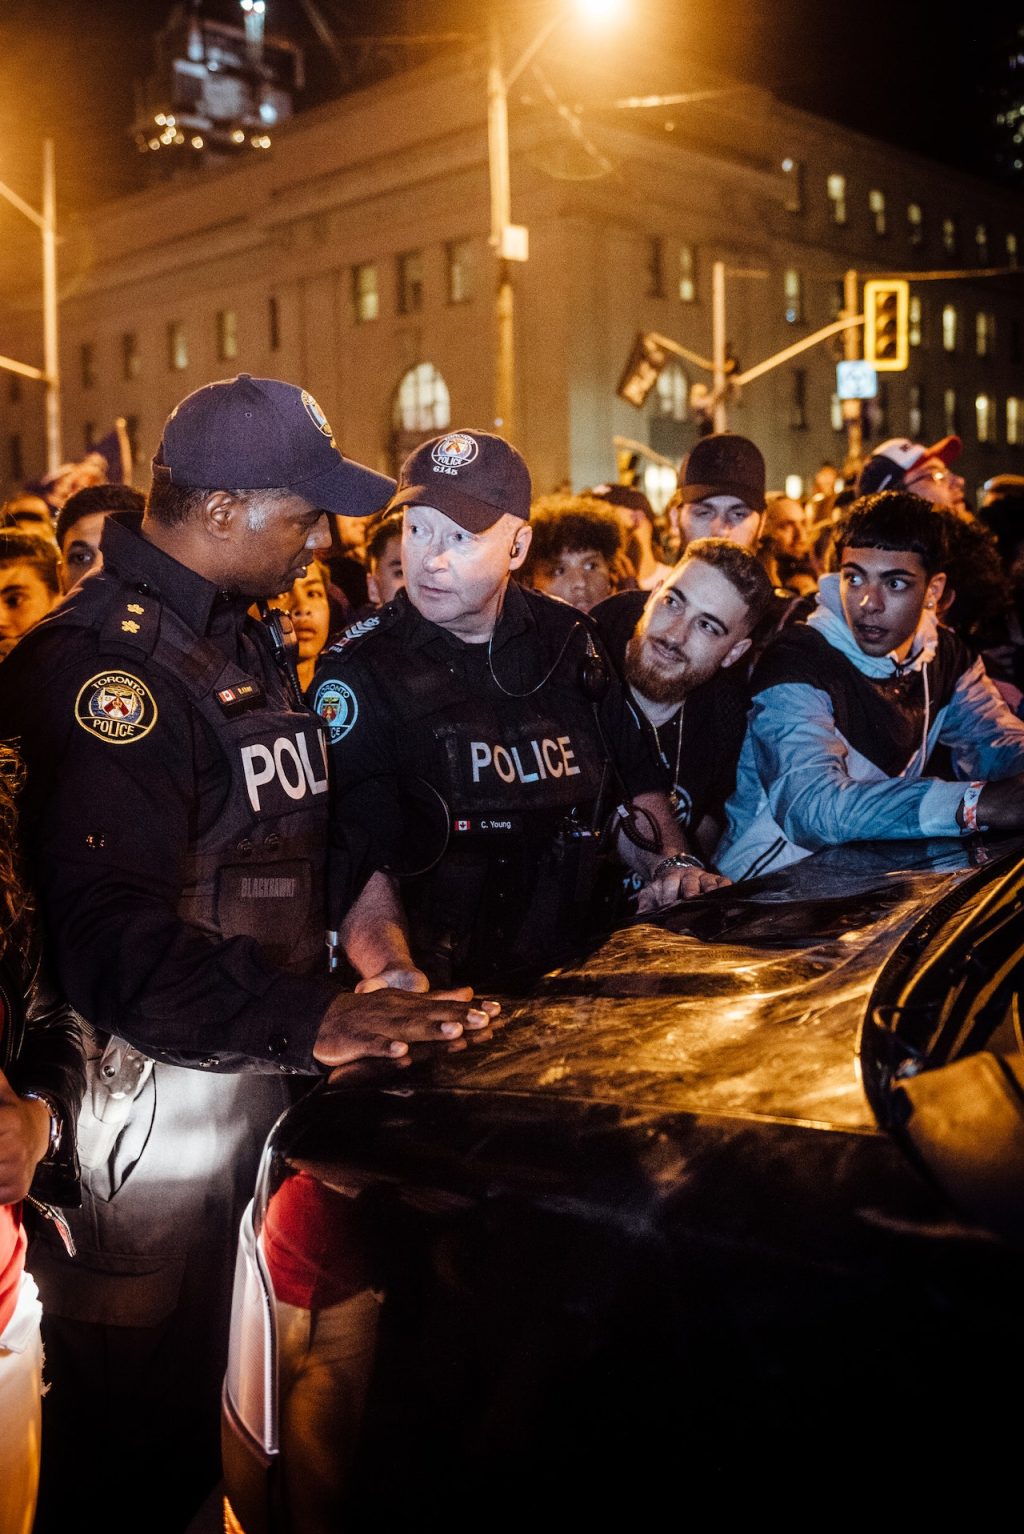 Cannabis Legalization Decreased Police Youth Incidents in Canada